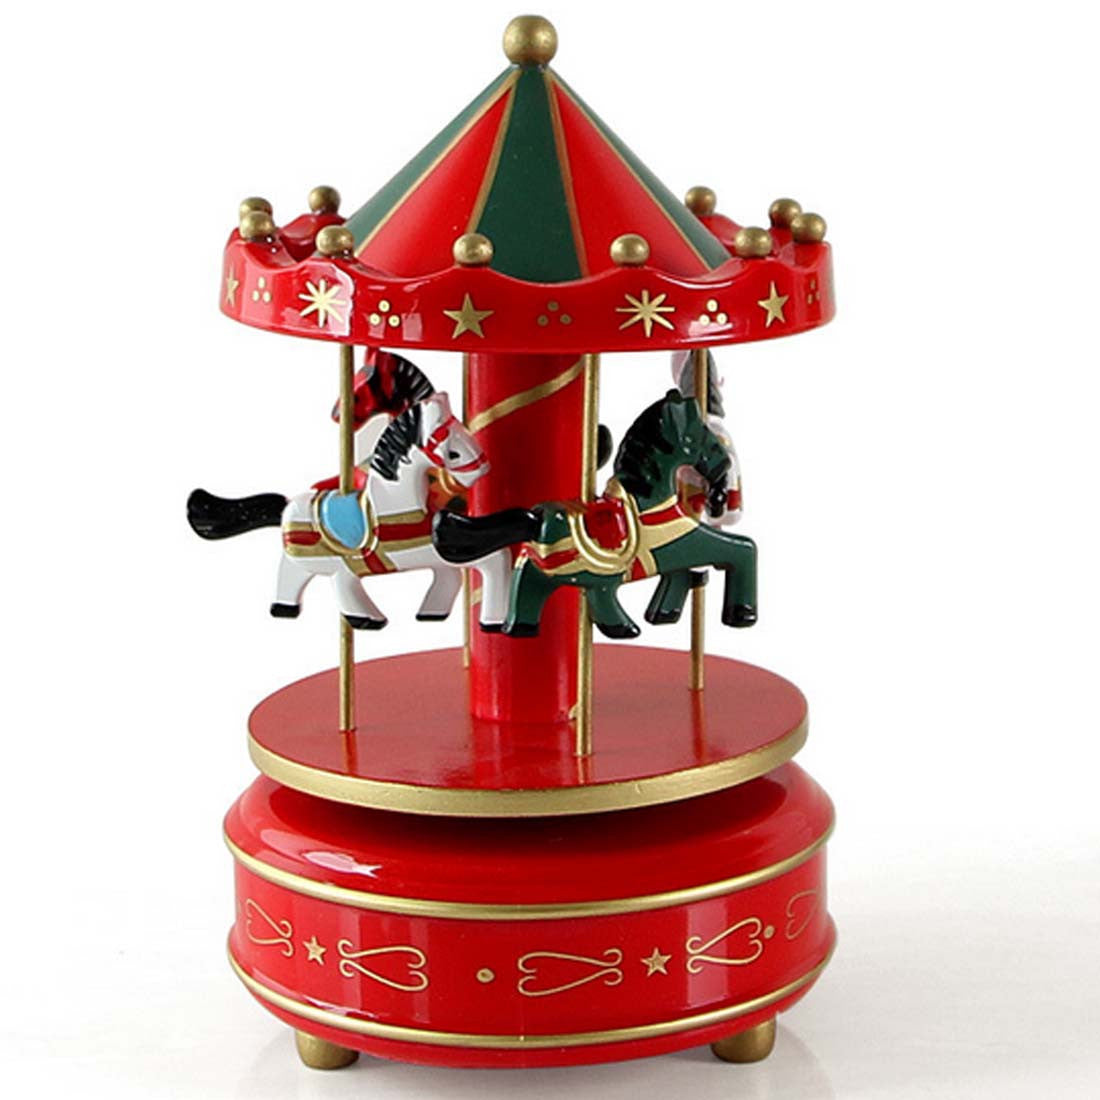 Wooden Merry-Go-Round Carousel Music Box For Kids Wedding Gift Toy